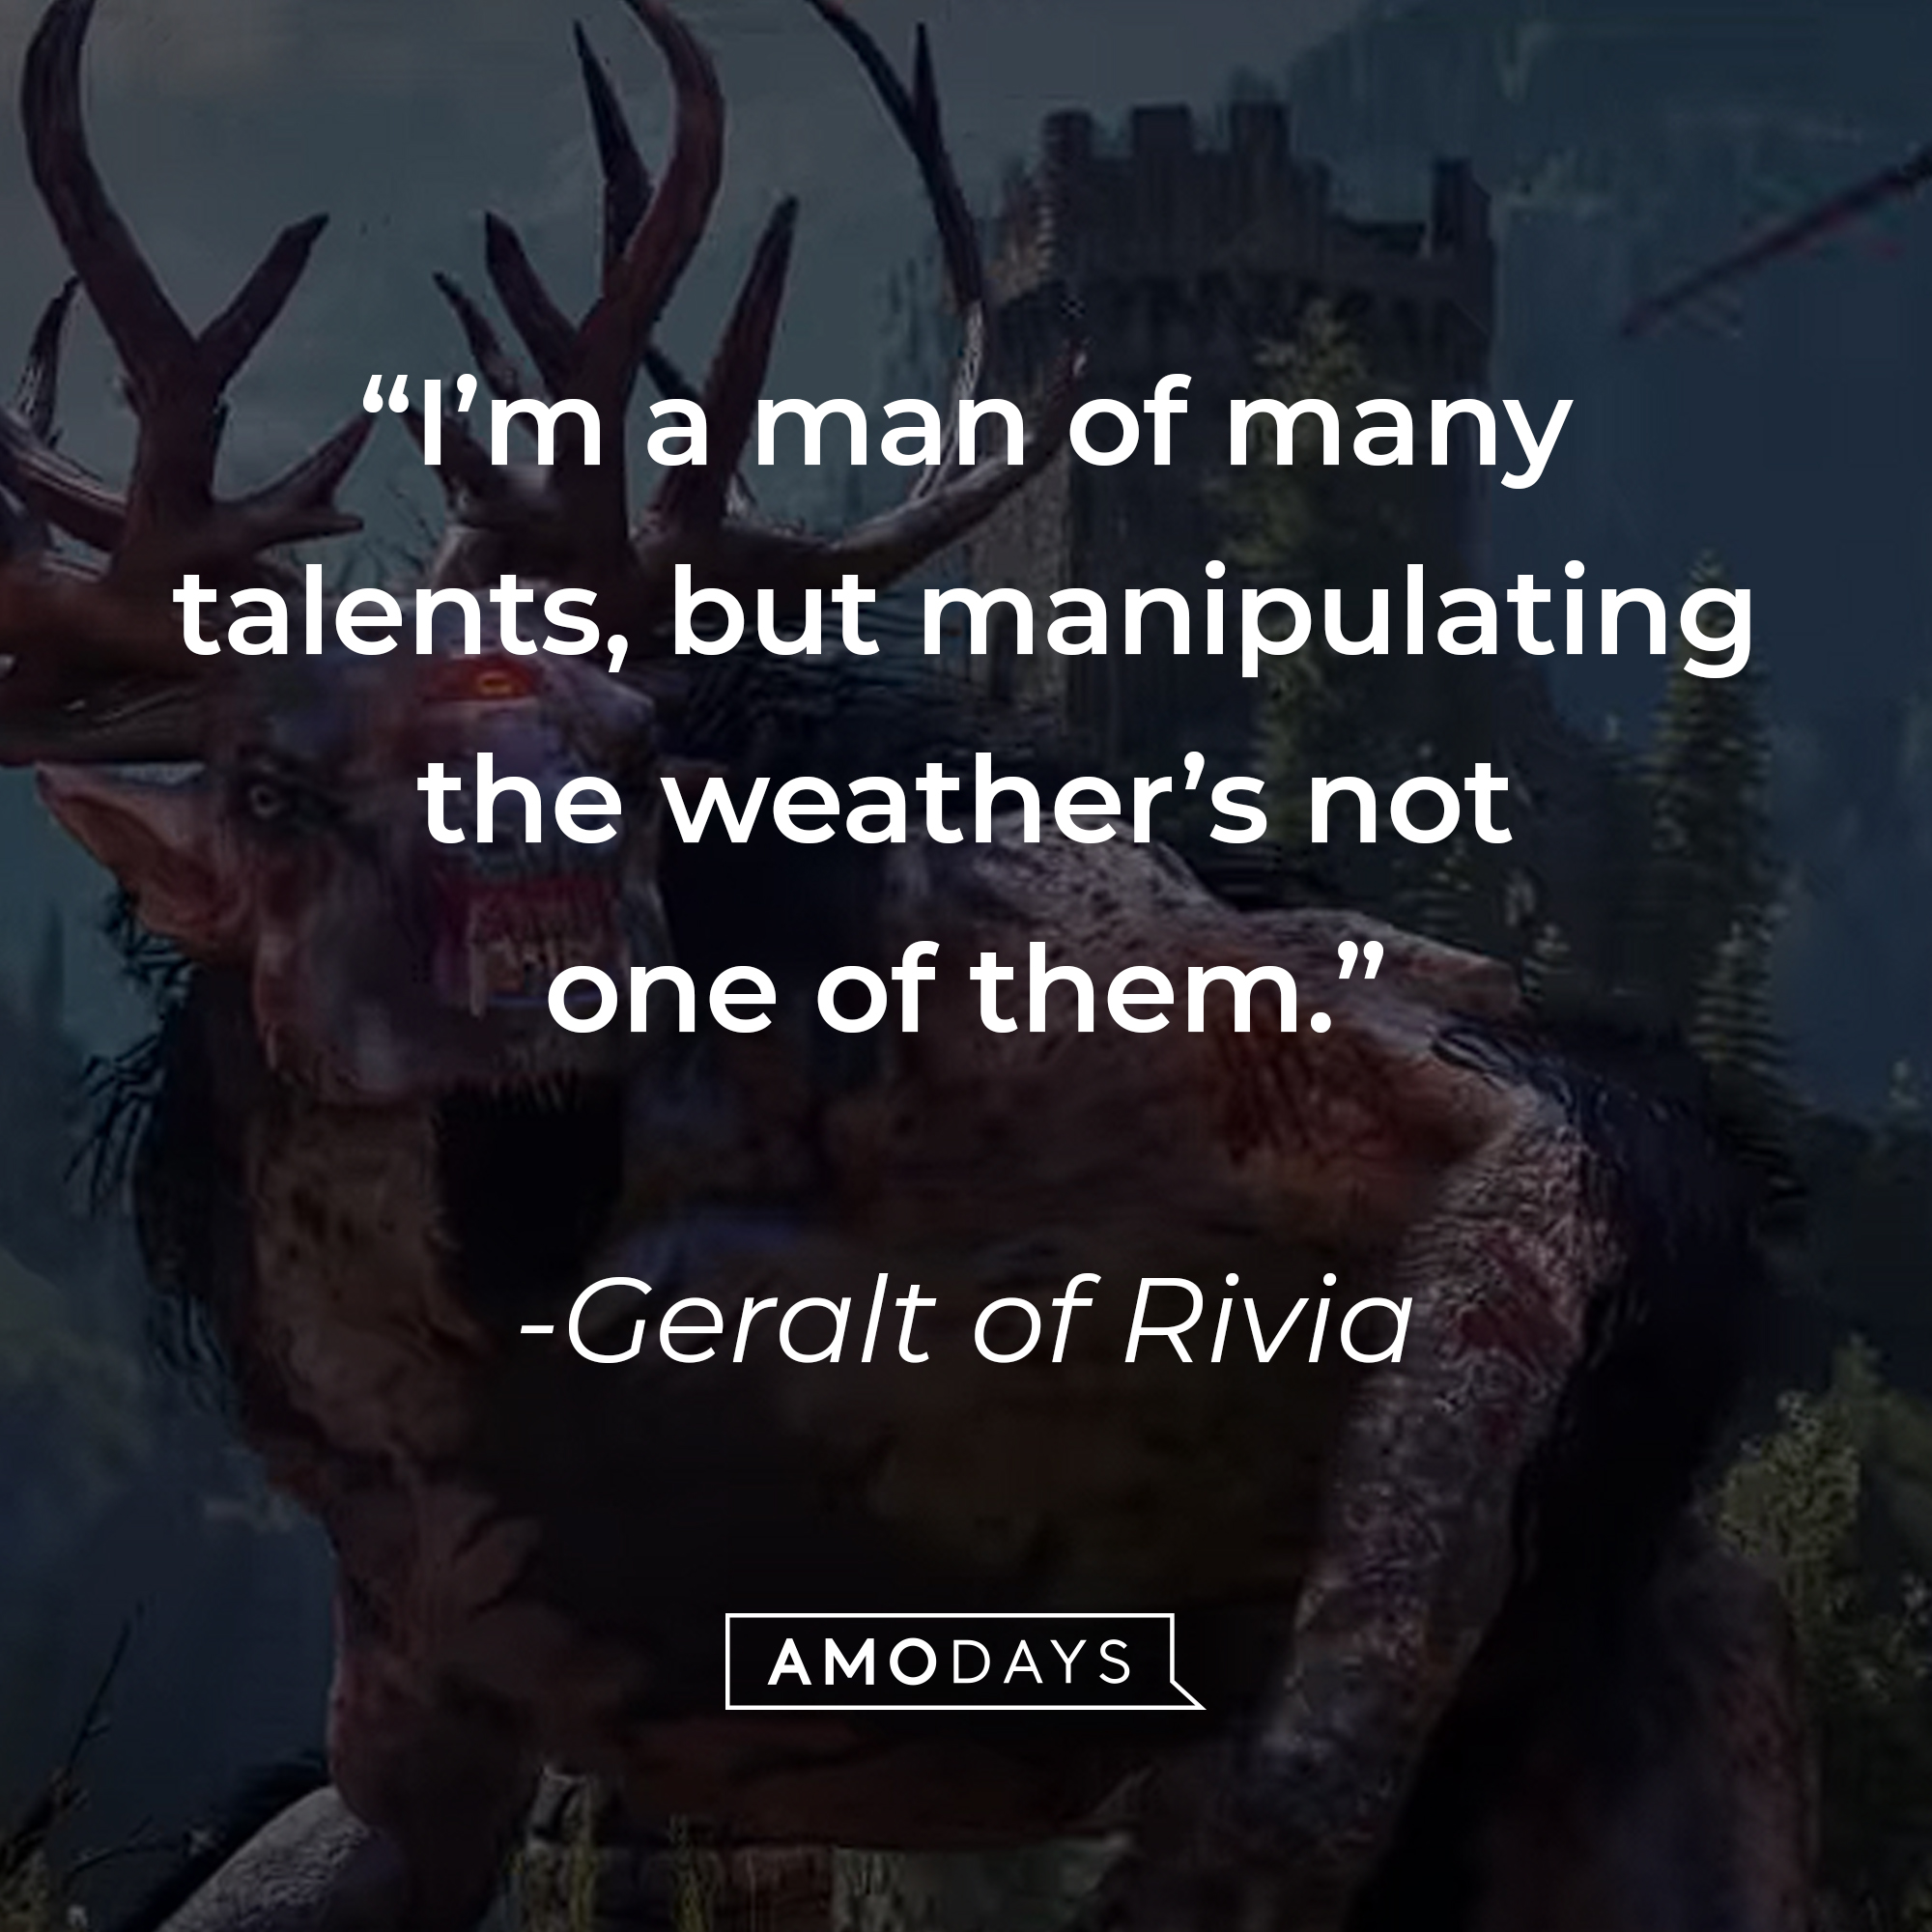 Geralt of Rivia's quote: “I’m a man of many talents, but manipulating the weather’s not one of them.” | Source: youtube.com/CDPRED